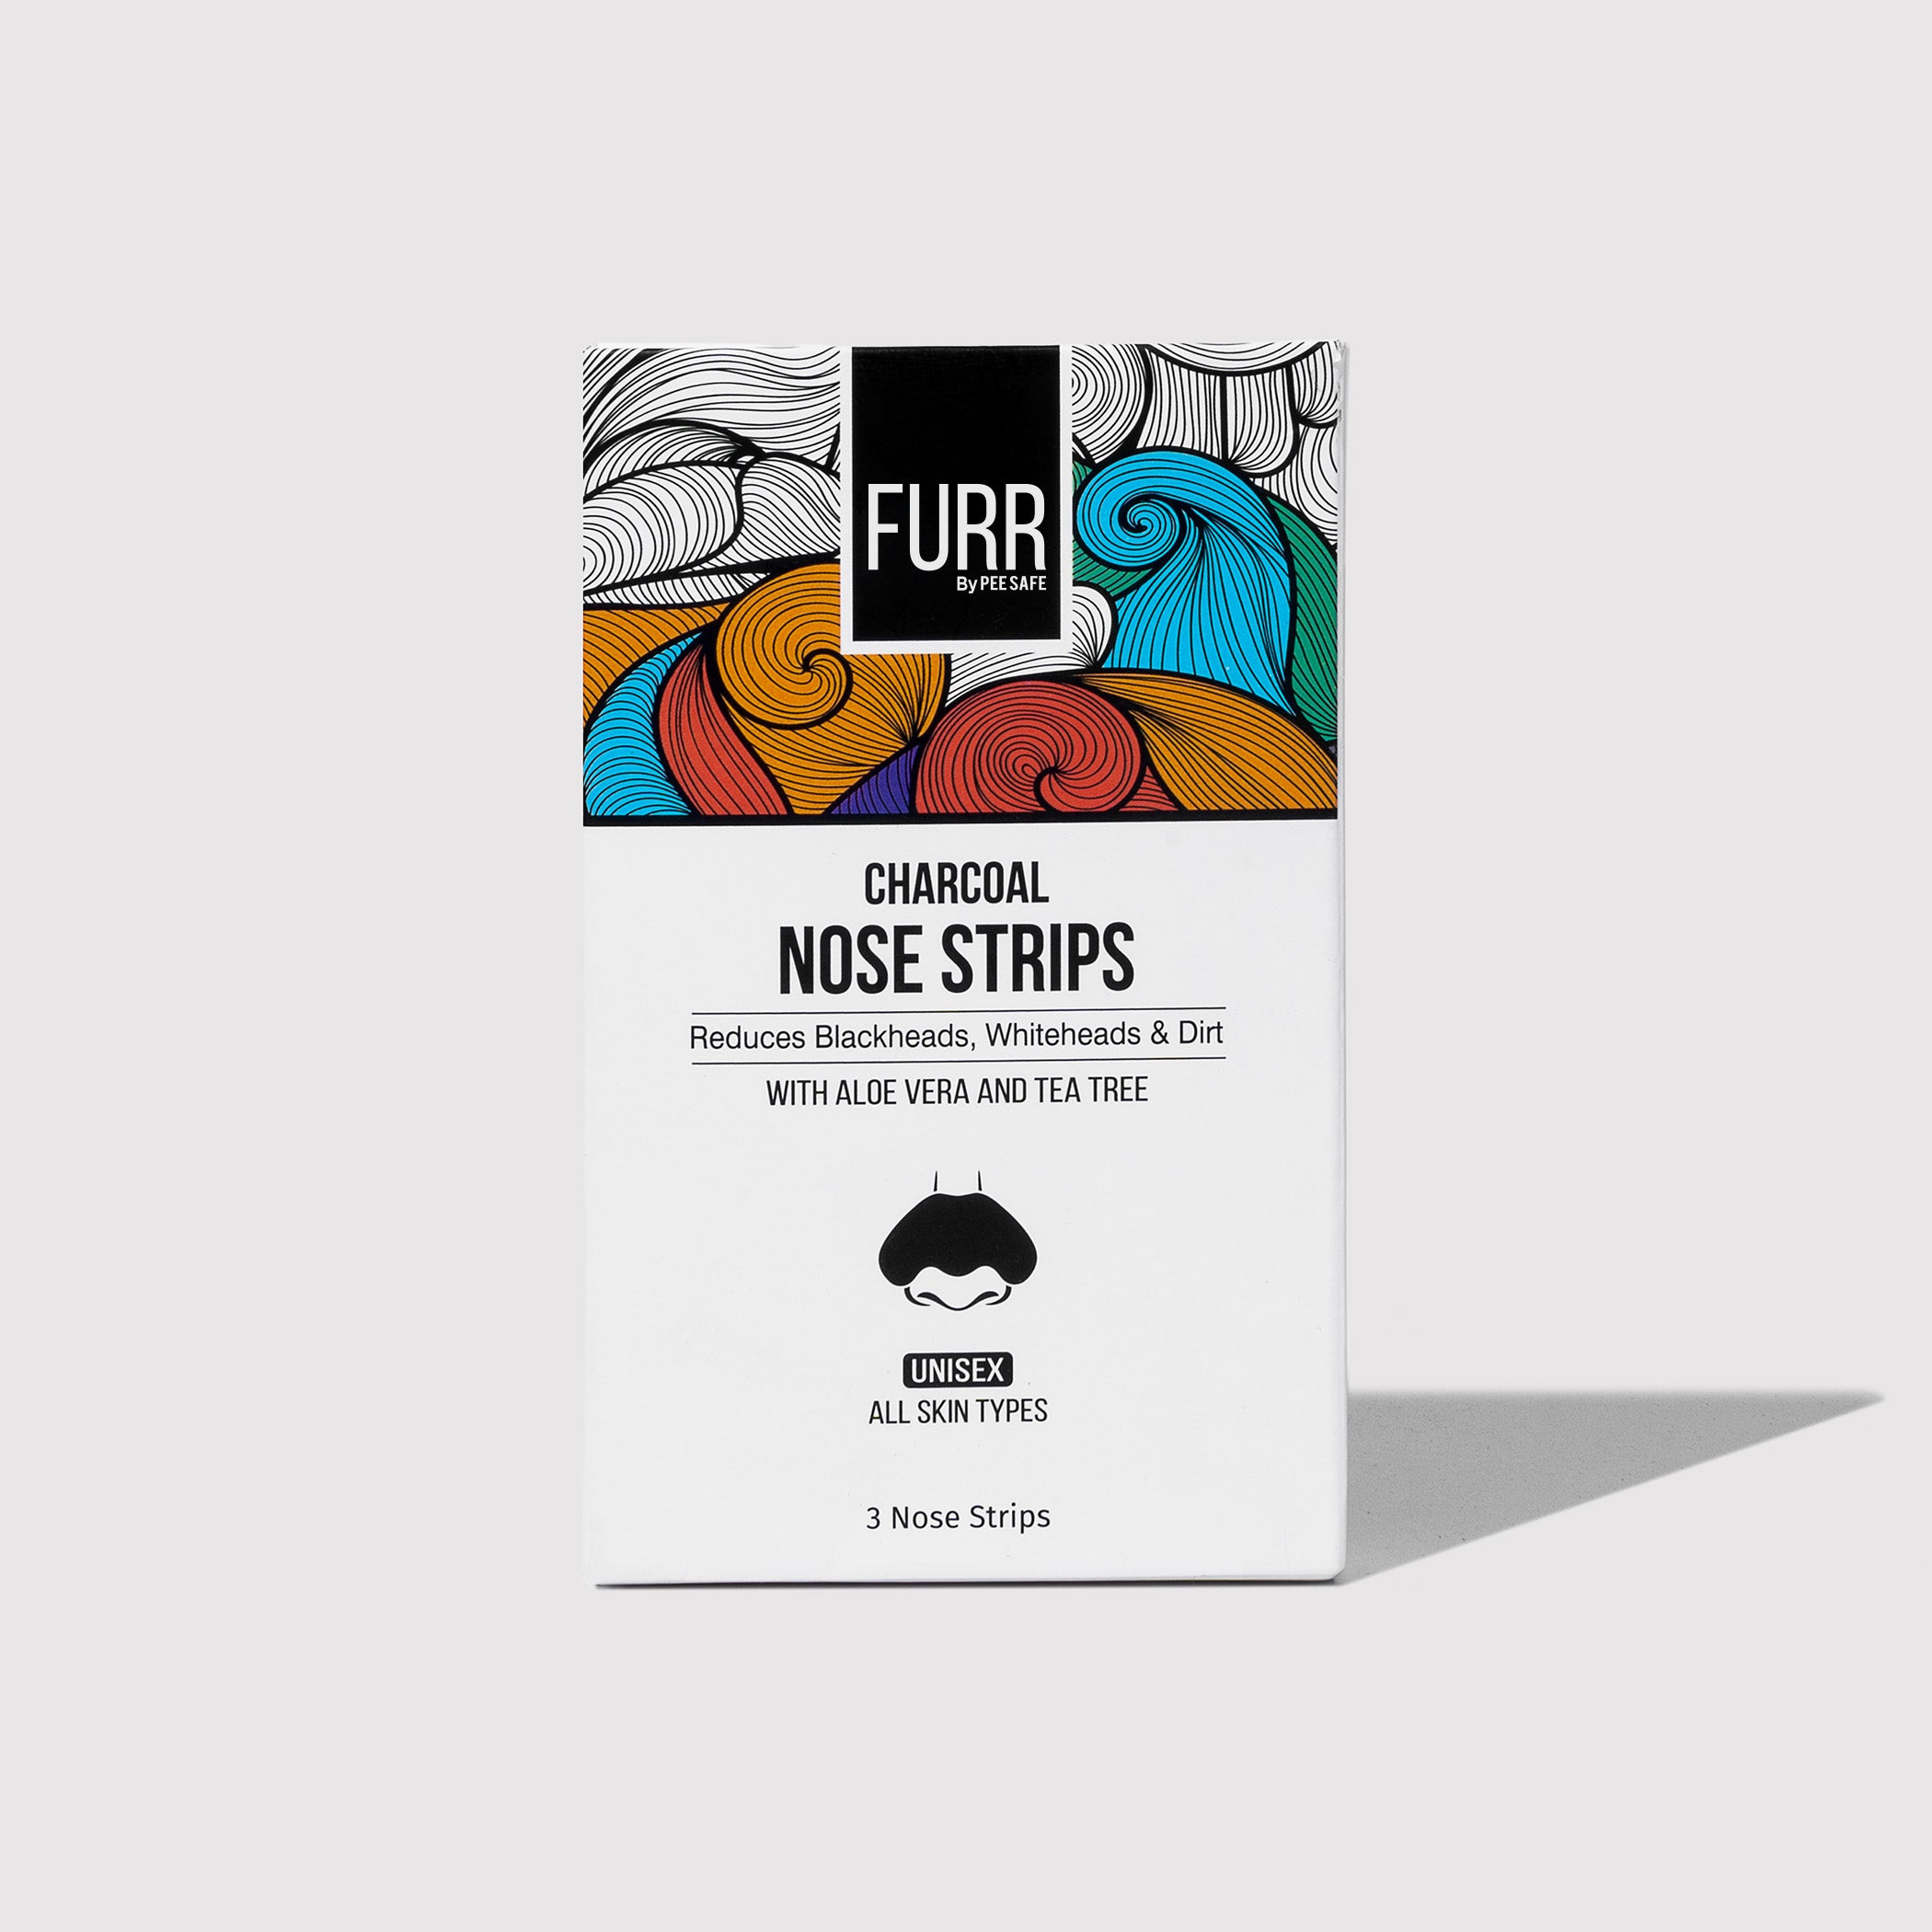 Furr Bamboo Charcoal Nose Strips (3N)